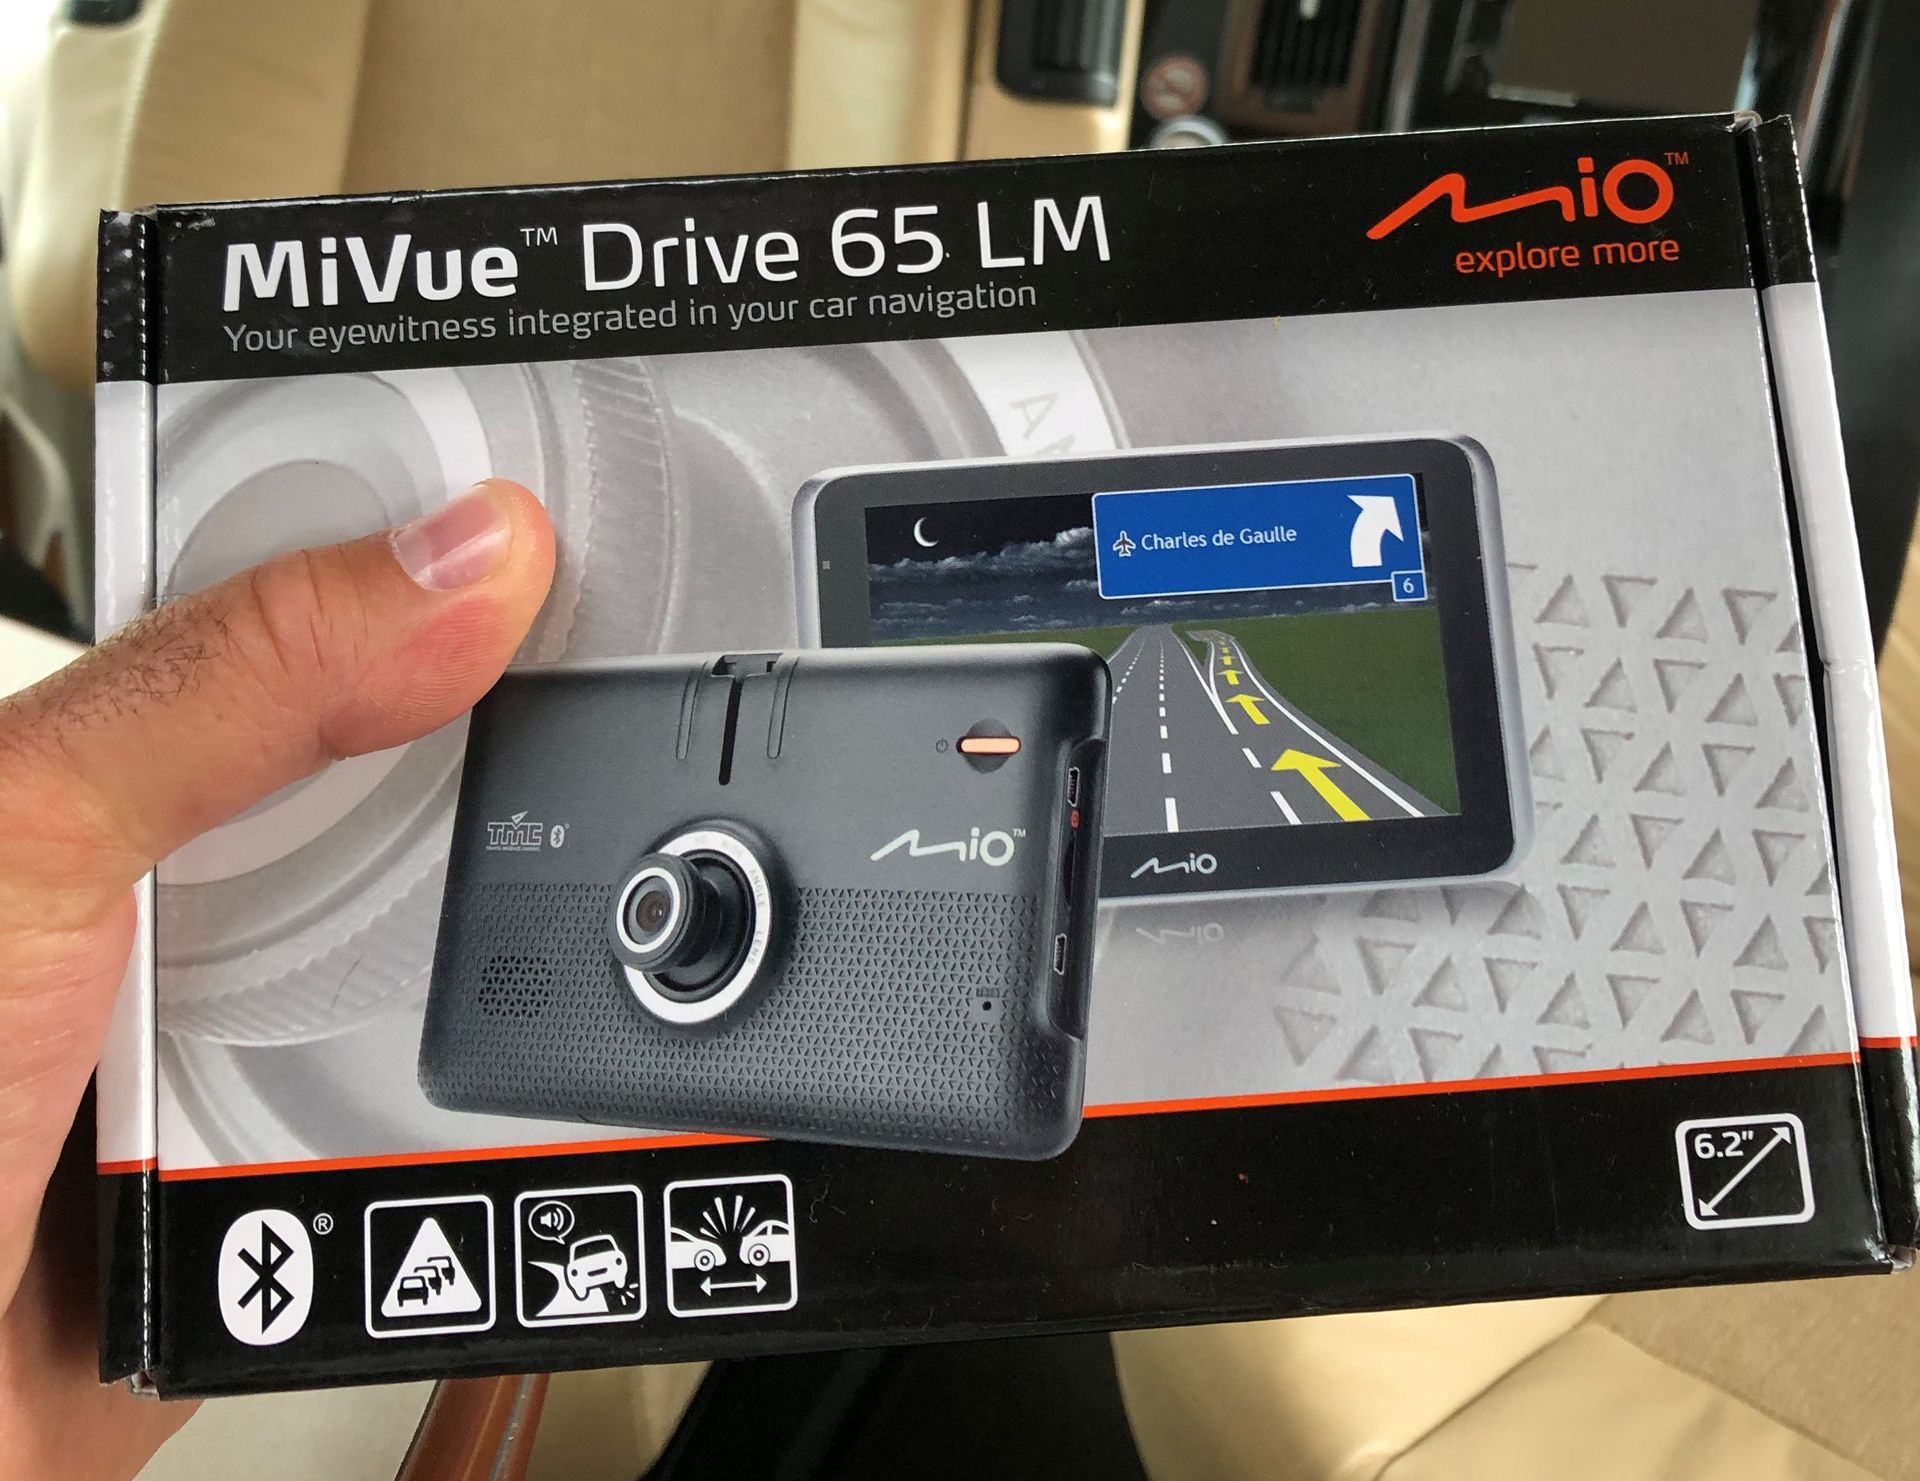 MiVue Drive 65 LM navigation test: navigation and camera in one – main image